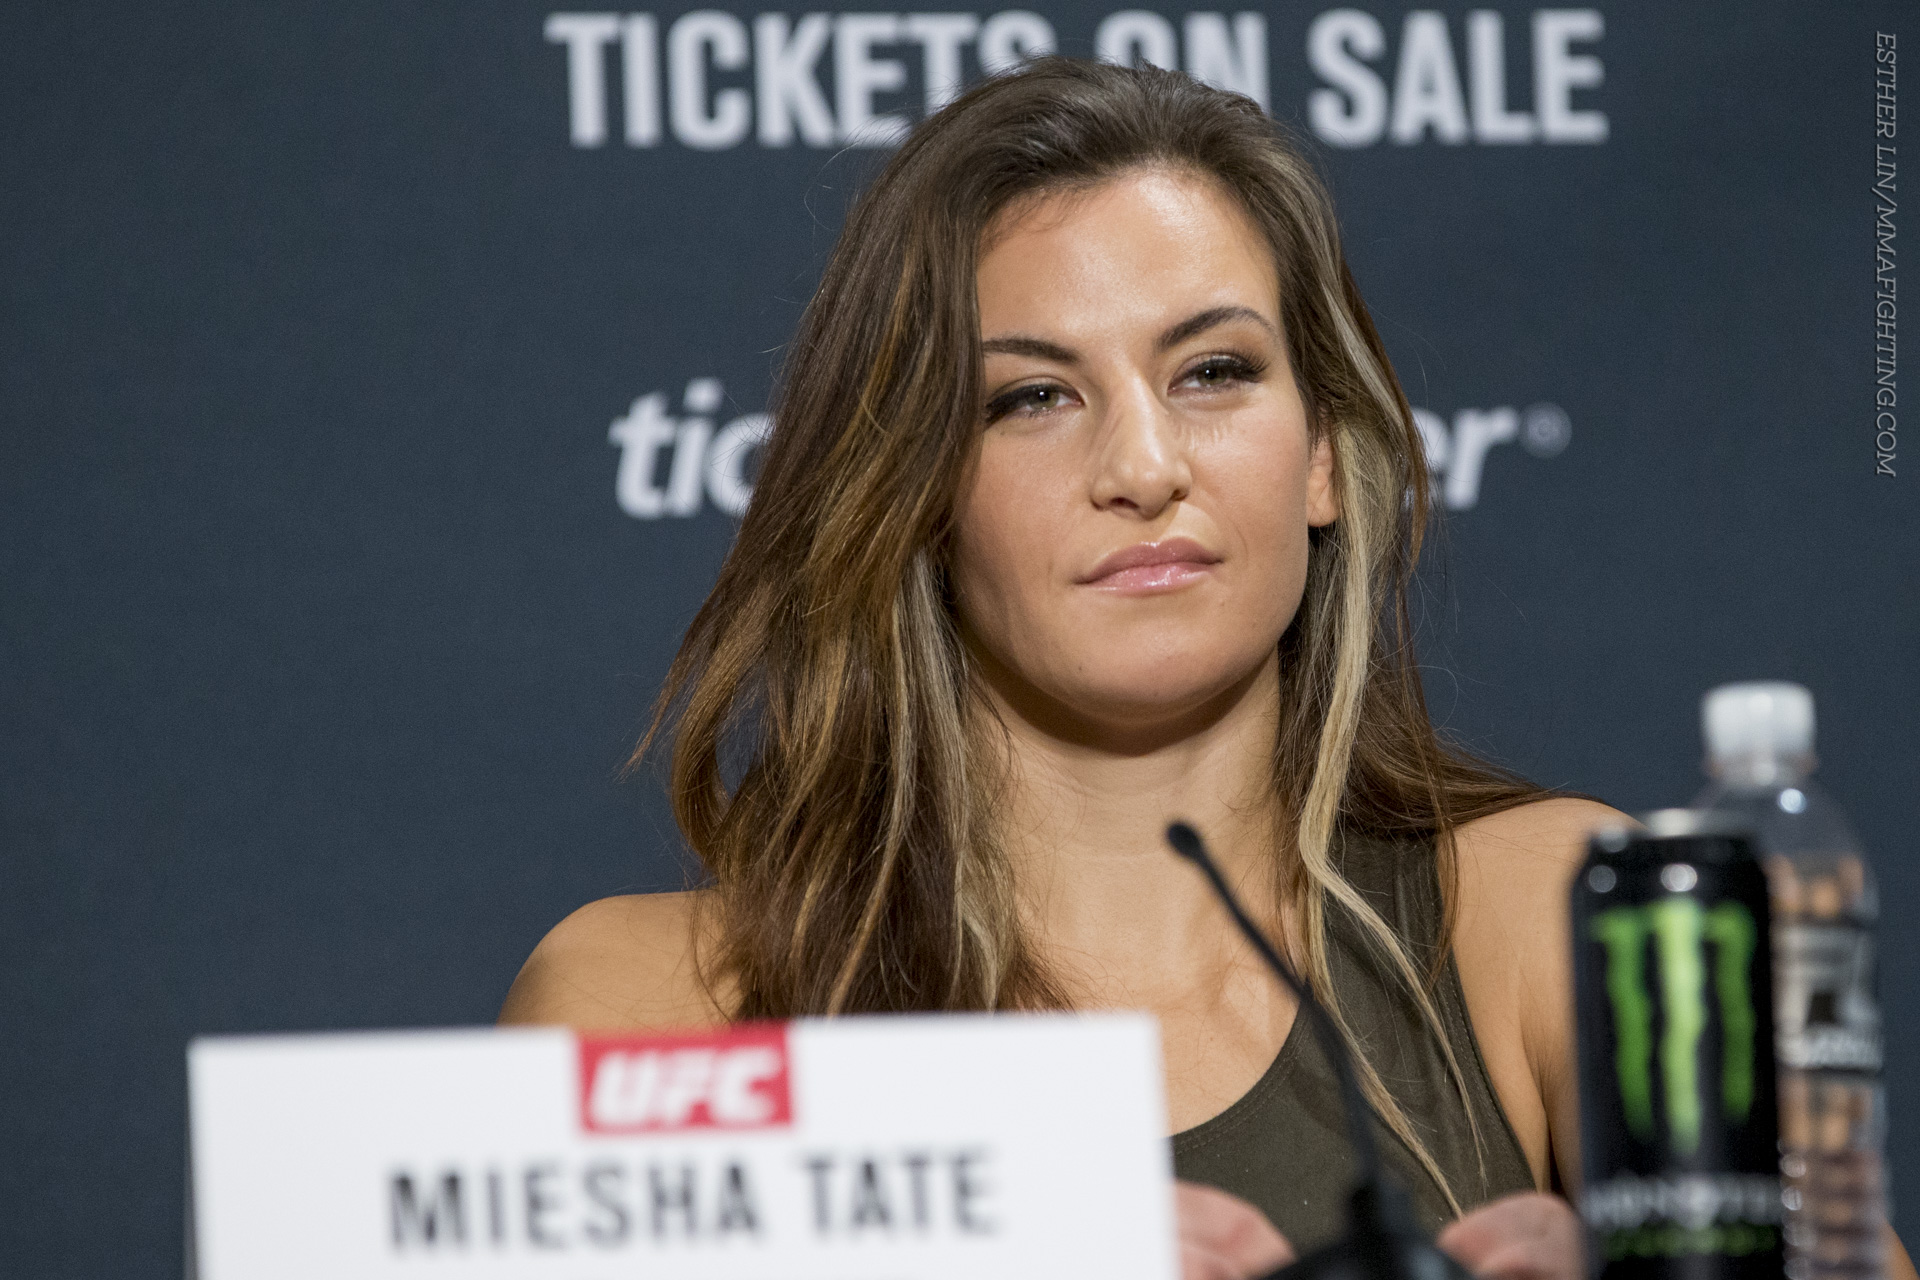 Miesha Tate listens to a question during the UFC 197 press conference in La...